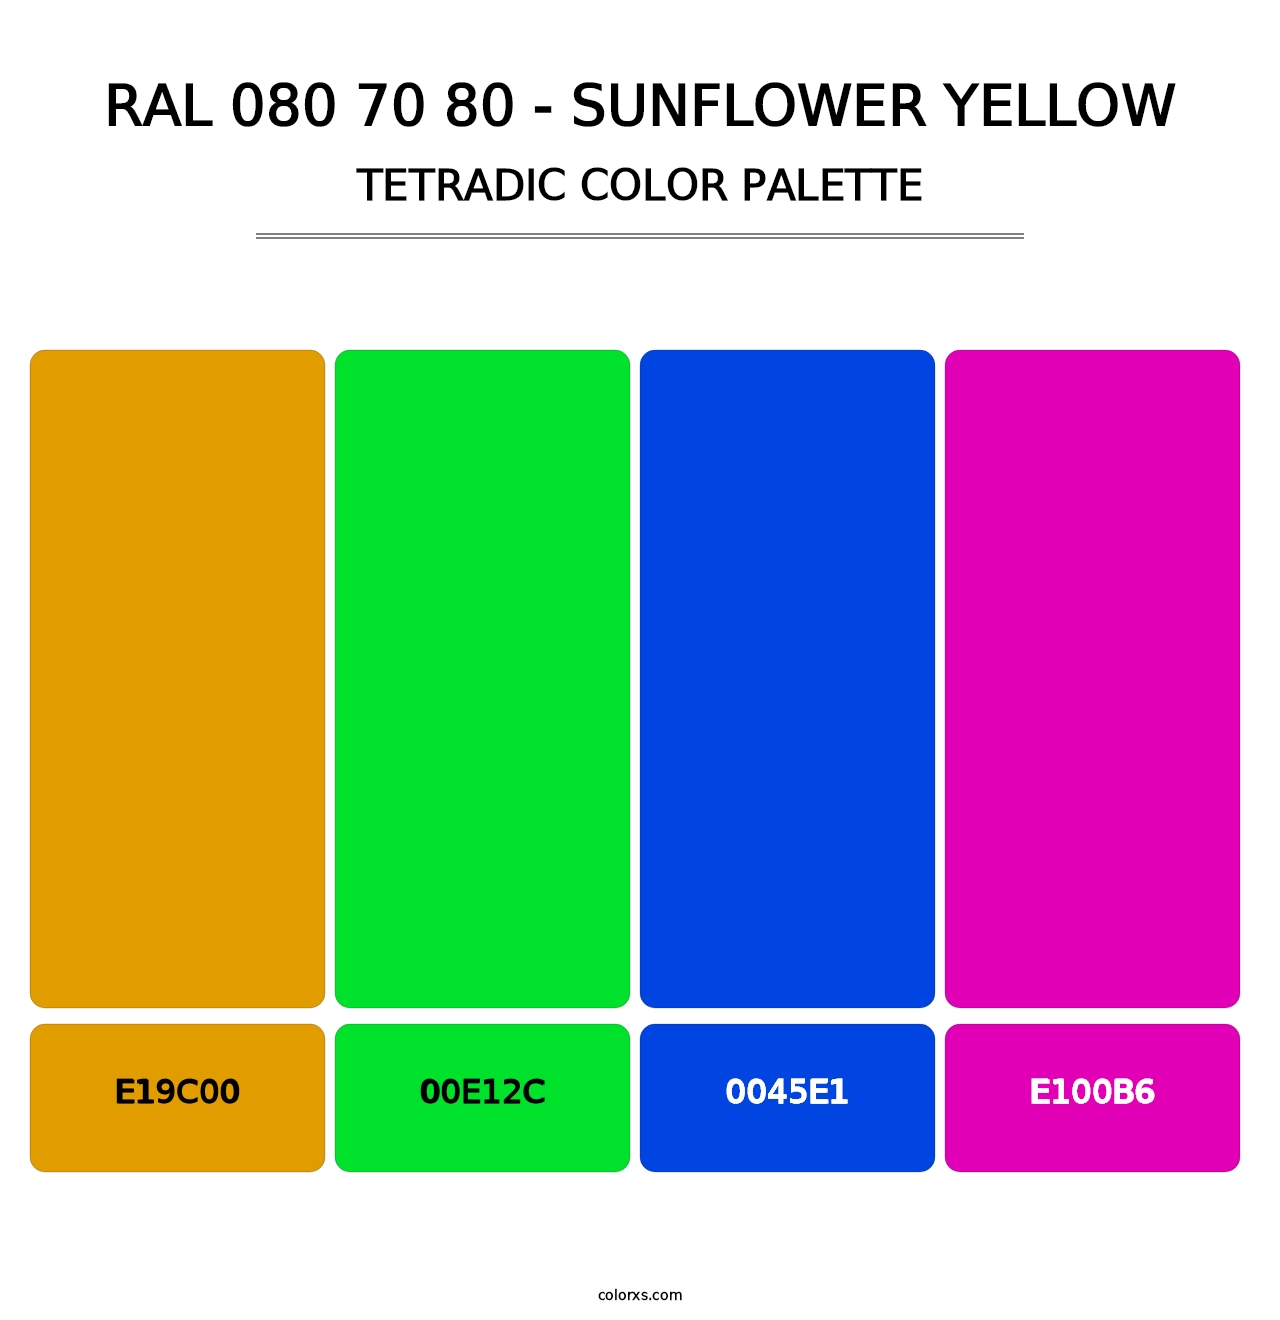 RAL 080 70 80 - Sunflower Yellow - Tetradic Color Palette